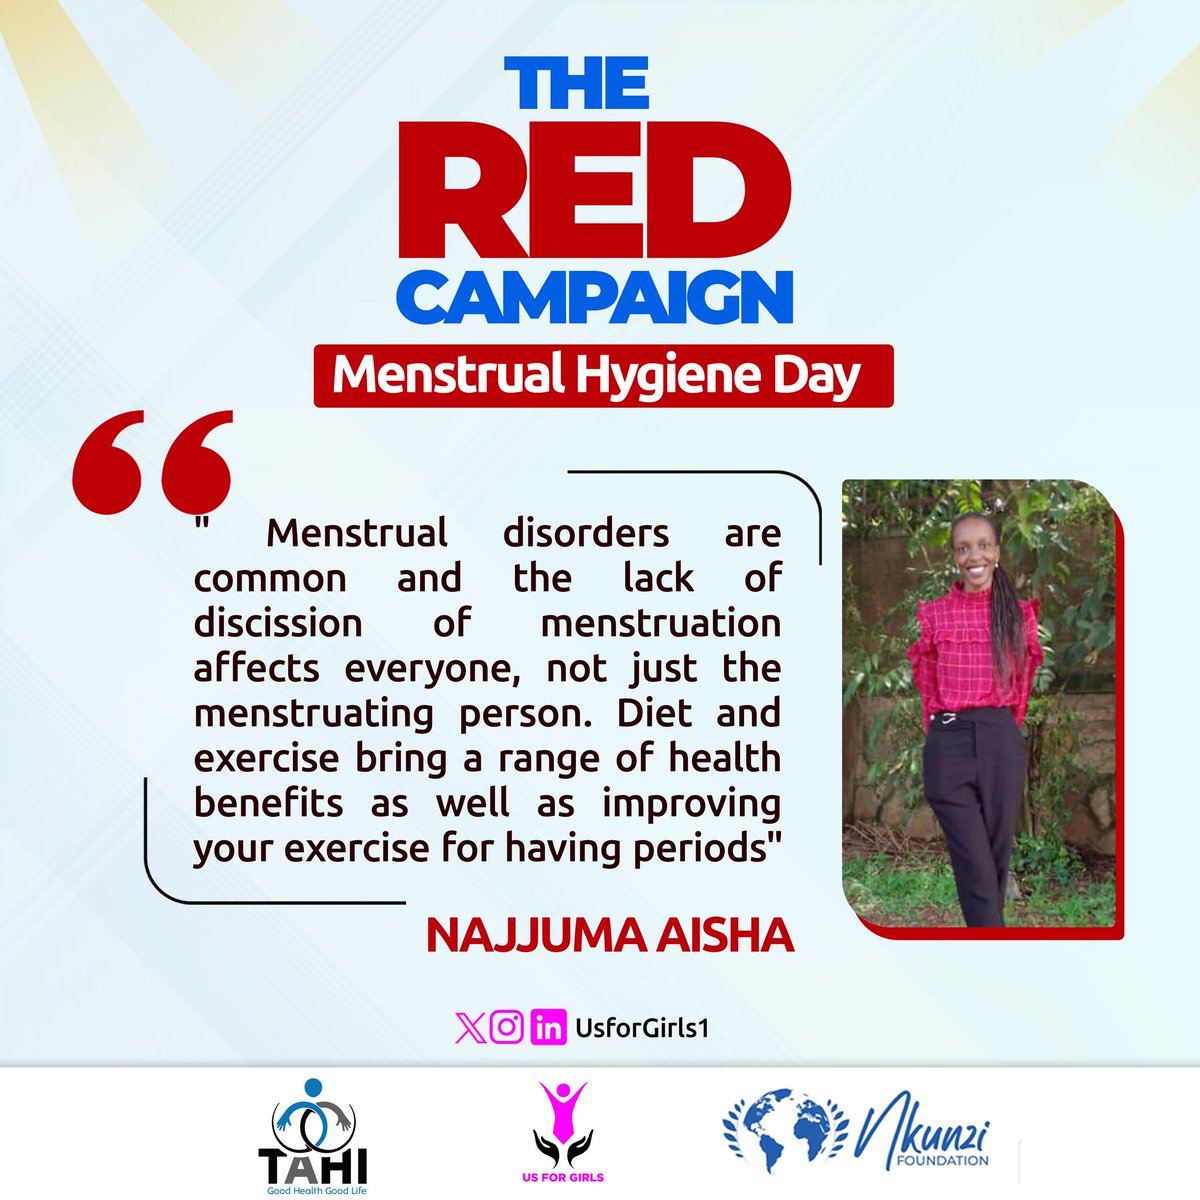 #RedCampaign

@AishaNajjuma1 reminds us that menstrual disorders are common and the lack of discussion of menstruation affects everyone, not just the person menstruating. Let us End the stigma.

She also reminds us that diet and exercise have a range of benefits
#EndPeriodStigma